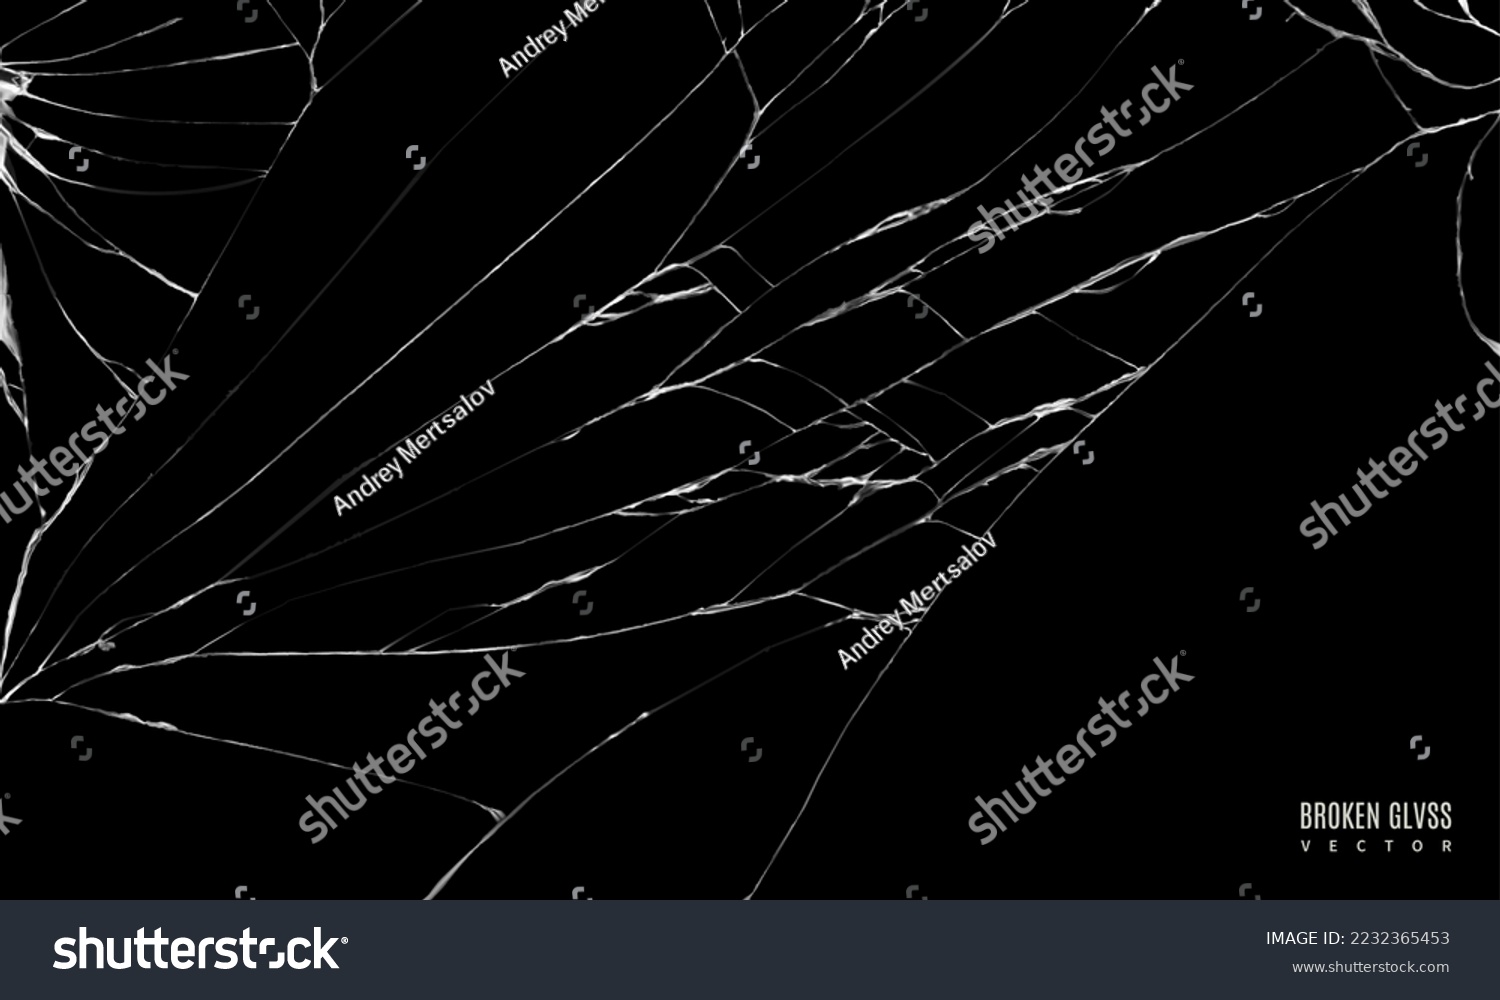 SVG of broken glass with realistic cracks black color. cracked screen texture for your design goals. editable vector illustration svg